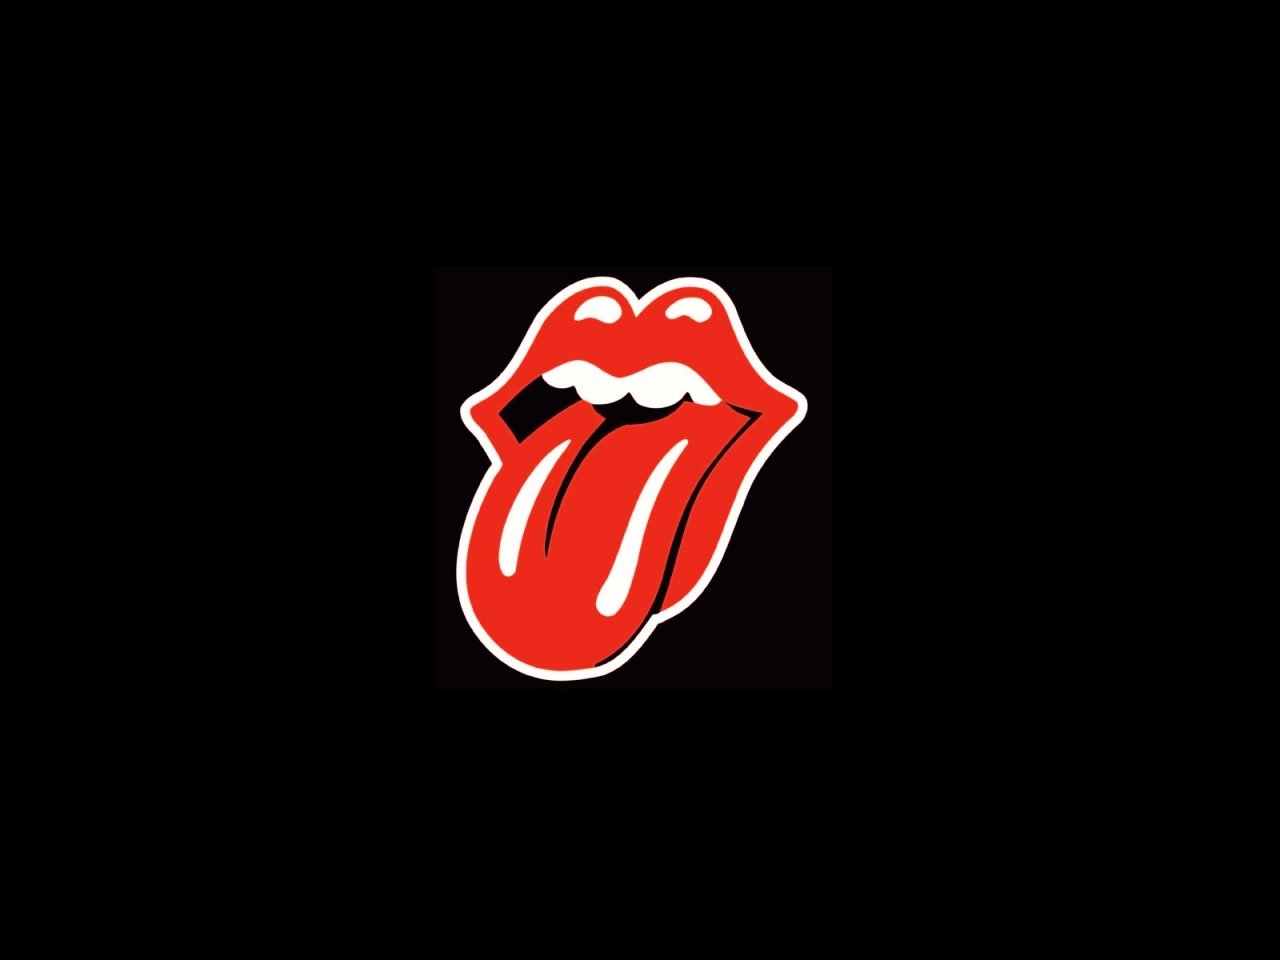 Awesome The Rolling Stones wallpaper The Rolling Stones wallpapers